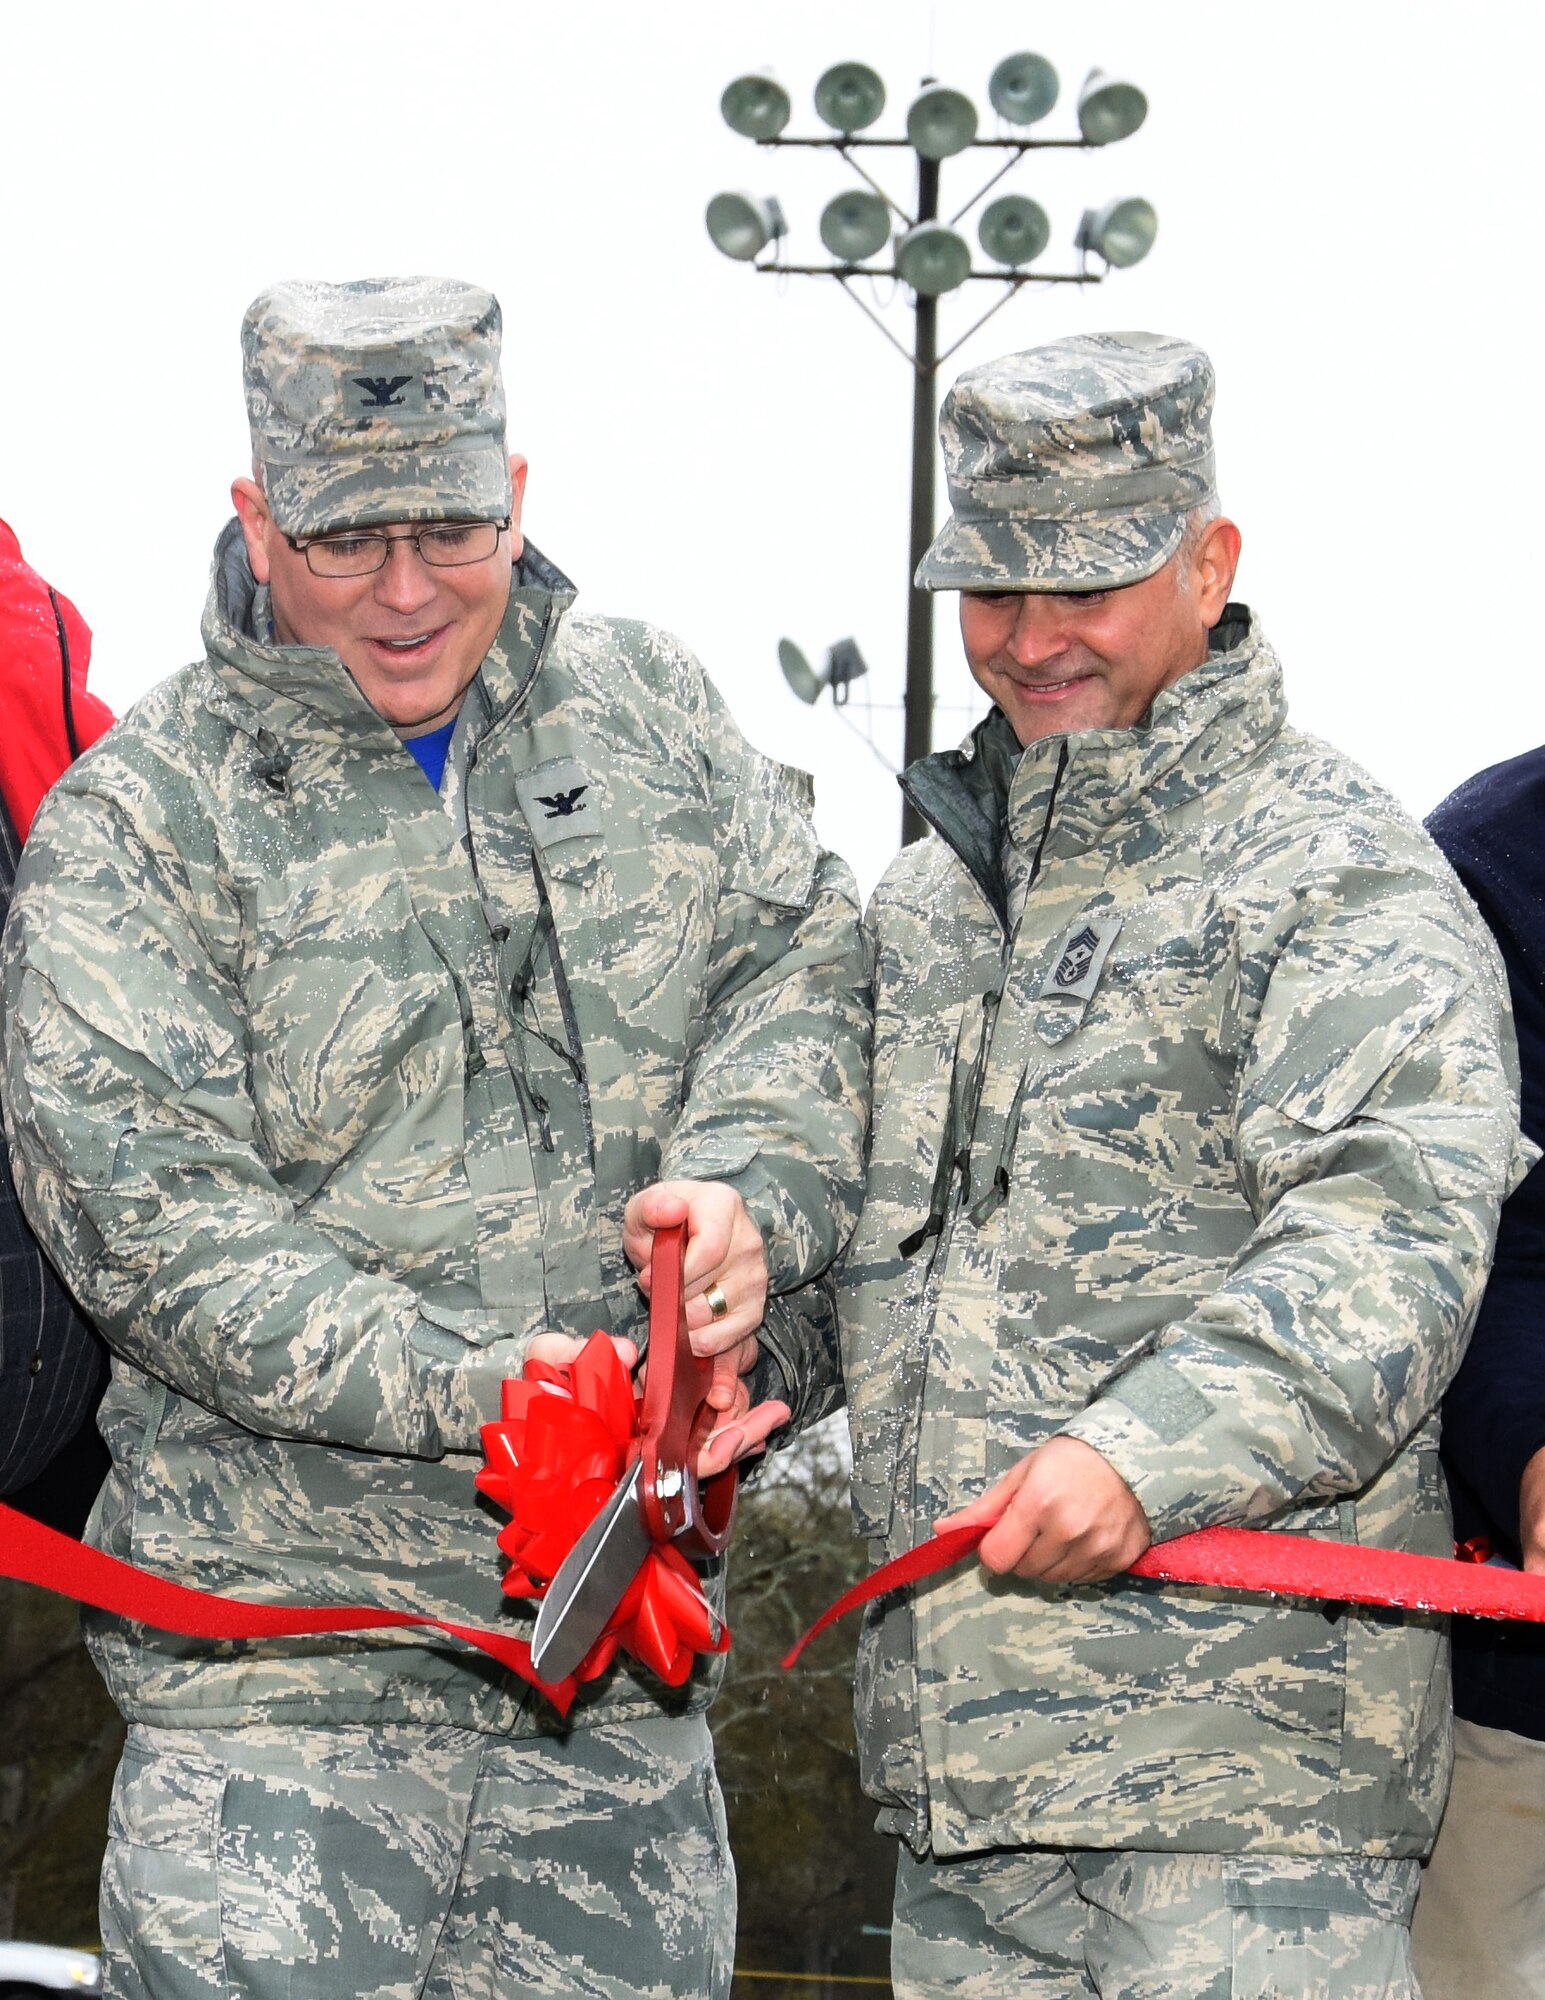 Col. Jeff King, 78th Air Base Wing commander, and Chief Master Sgt. Emilio Hernandez, 78th AFB command chief, take part in the ribbon cutting during the 78th Force Support Squadron Track & Field Dedication. (U.S. Air Force photo by Ed Aspera)